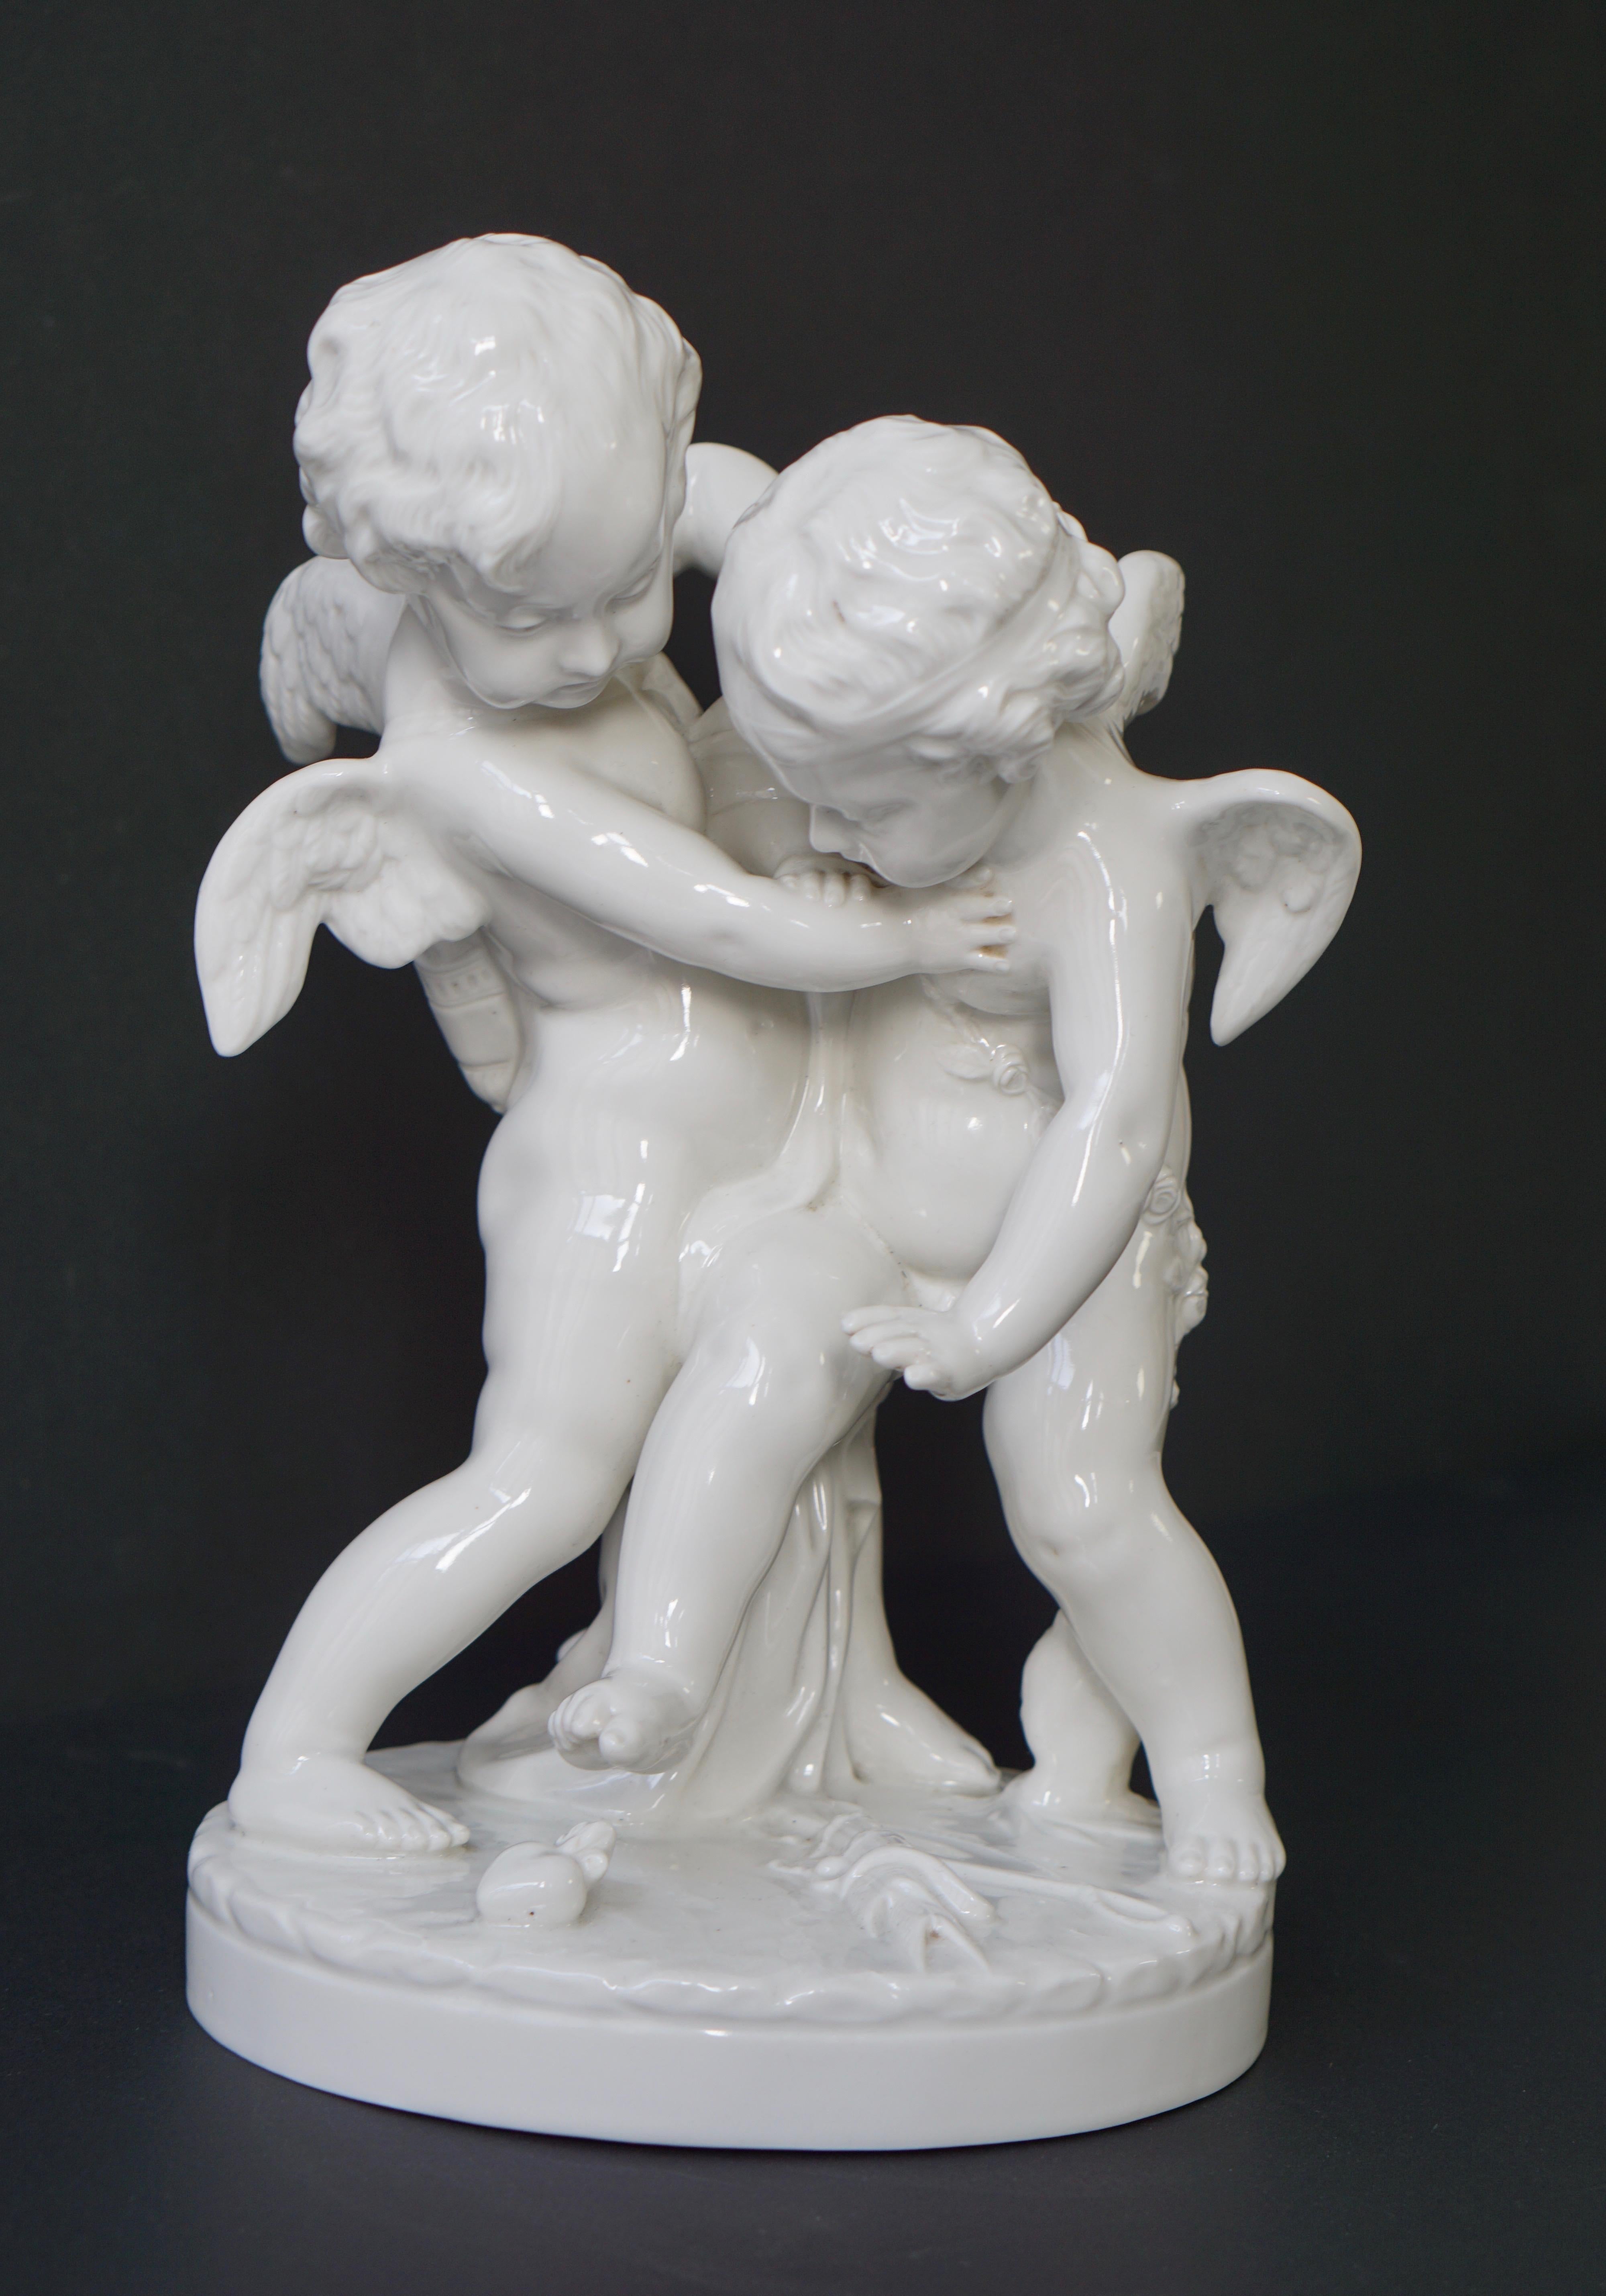  Porcelain Figurative Sculpture Representing Two Little Angels, Putti For Sale 7